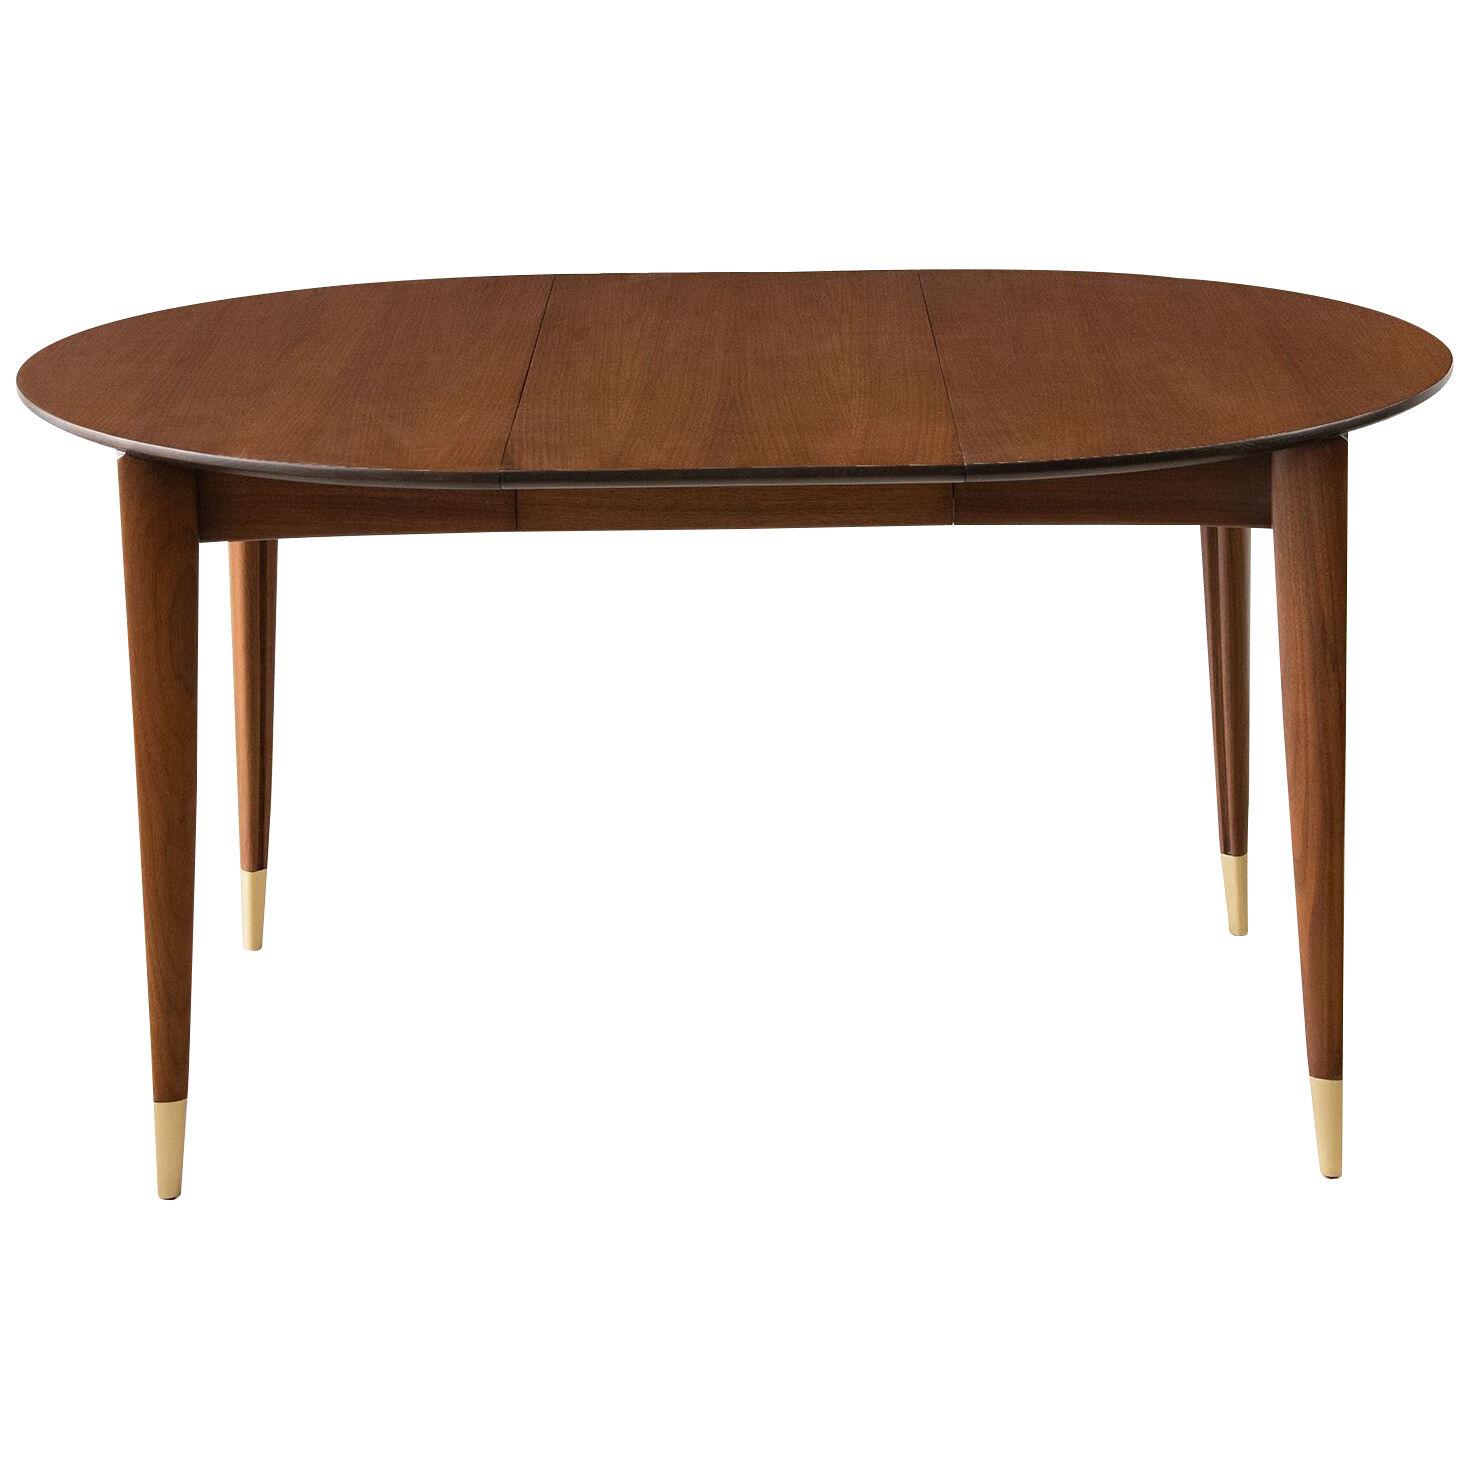 Gio Ponti Extension Dining Table in Italian Walnut - M. Singer & Sons